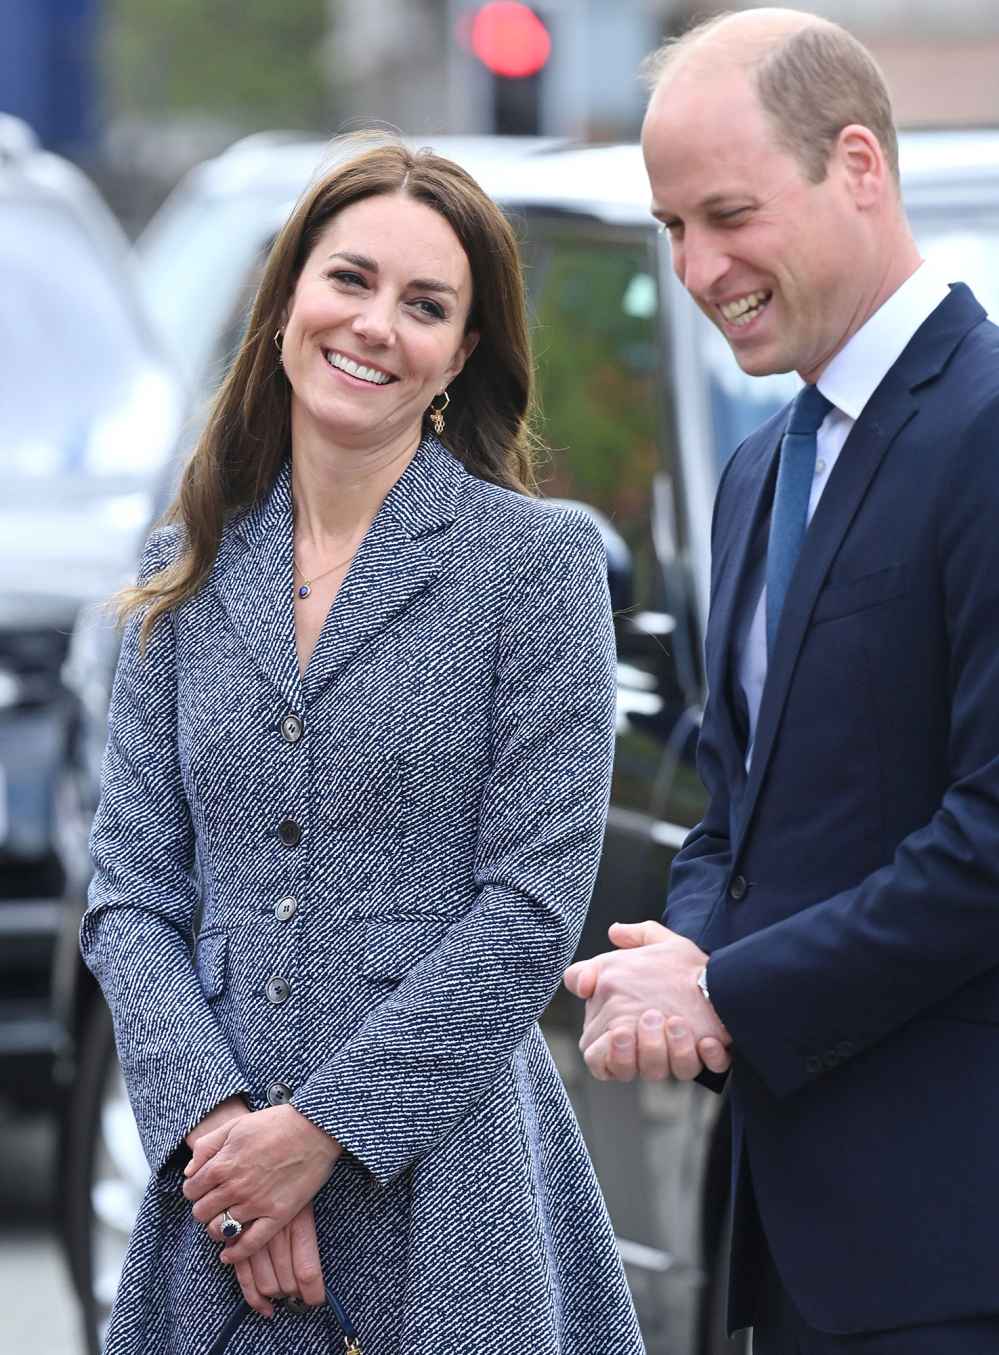 Paying Homage Kate Middleton Wears Honeycomb Earrings With Special Meaning